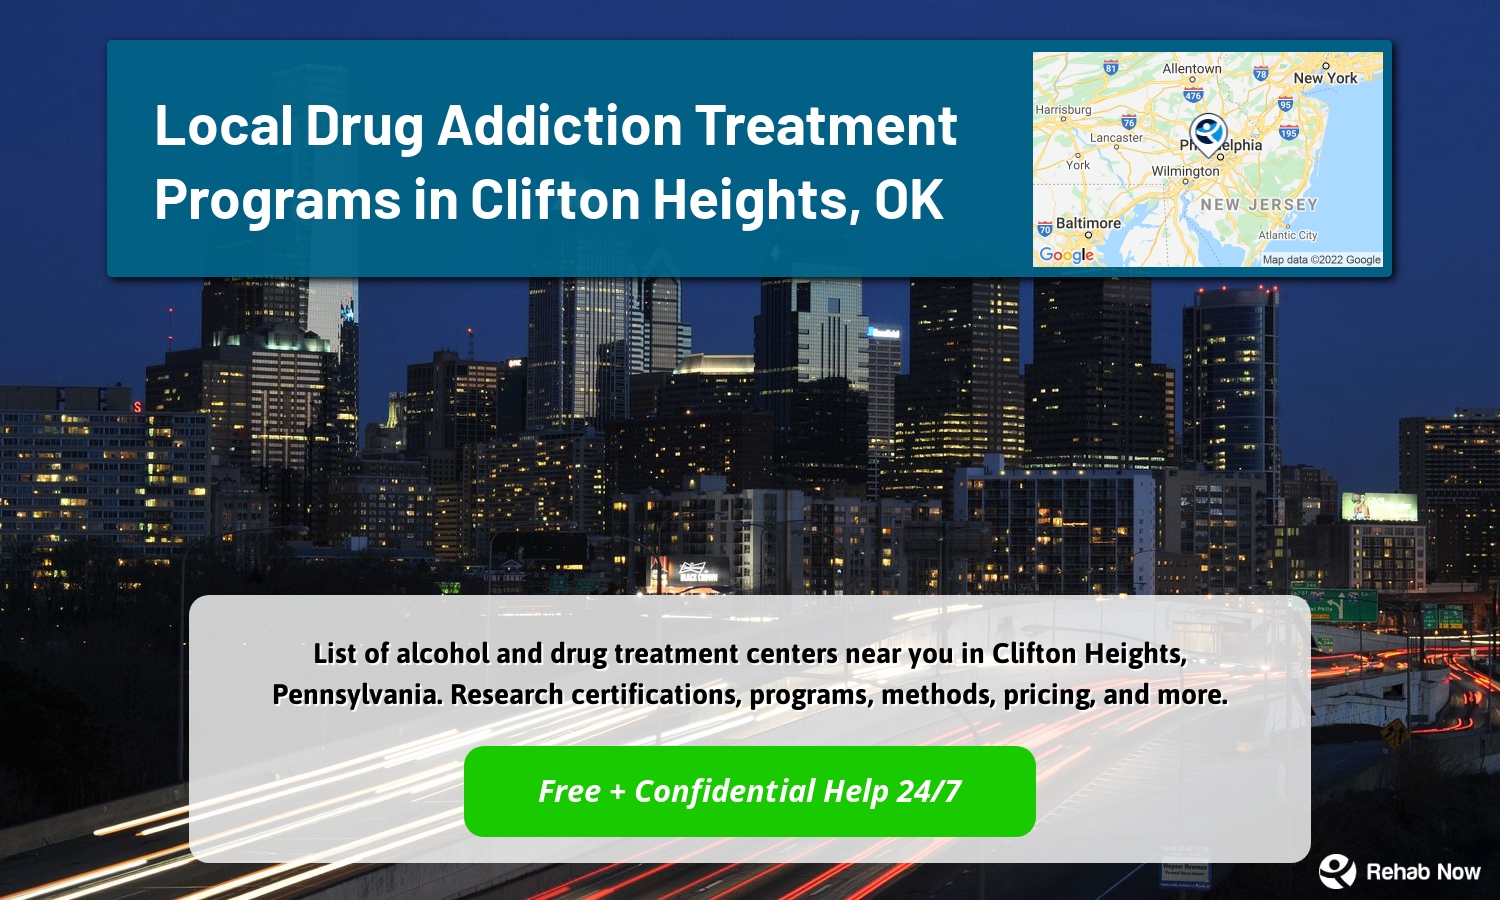 List of alcohol and drug treatment centers near you in Clifton Heights, Pennsylvania. Research certifications, programs, methods, pricing, and more.